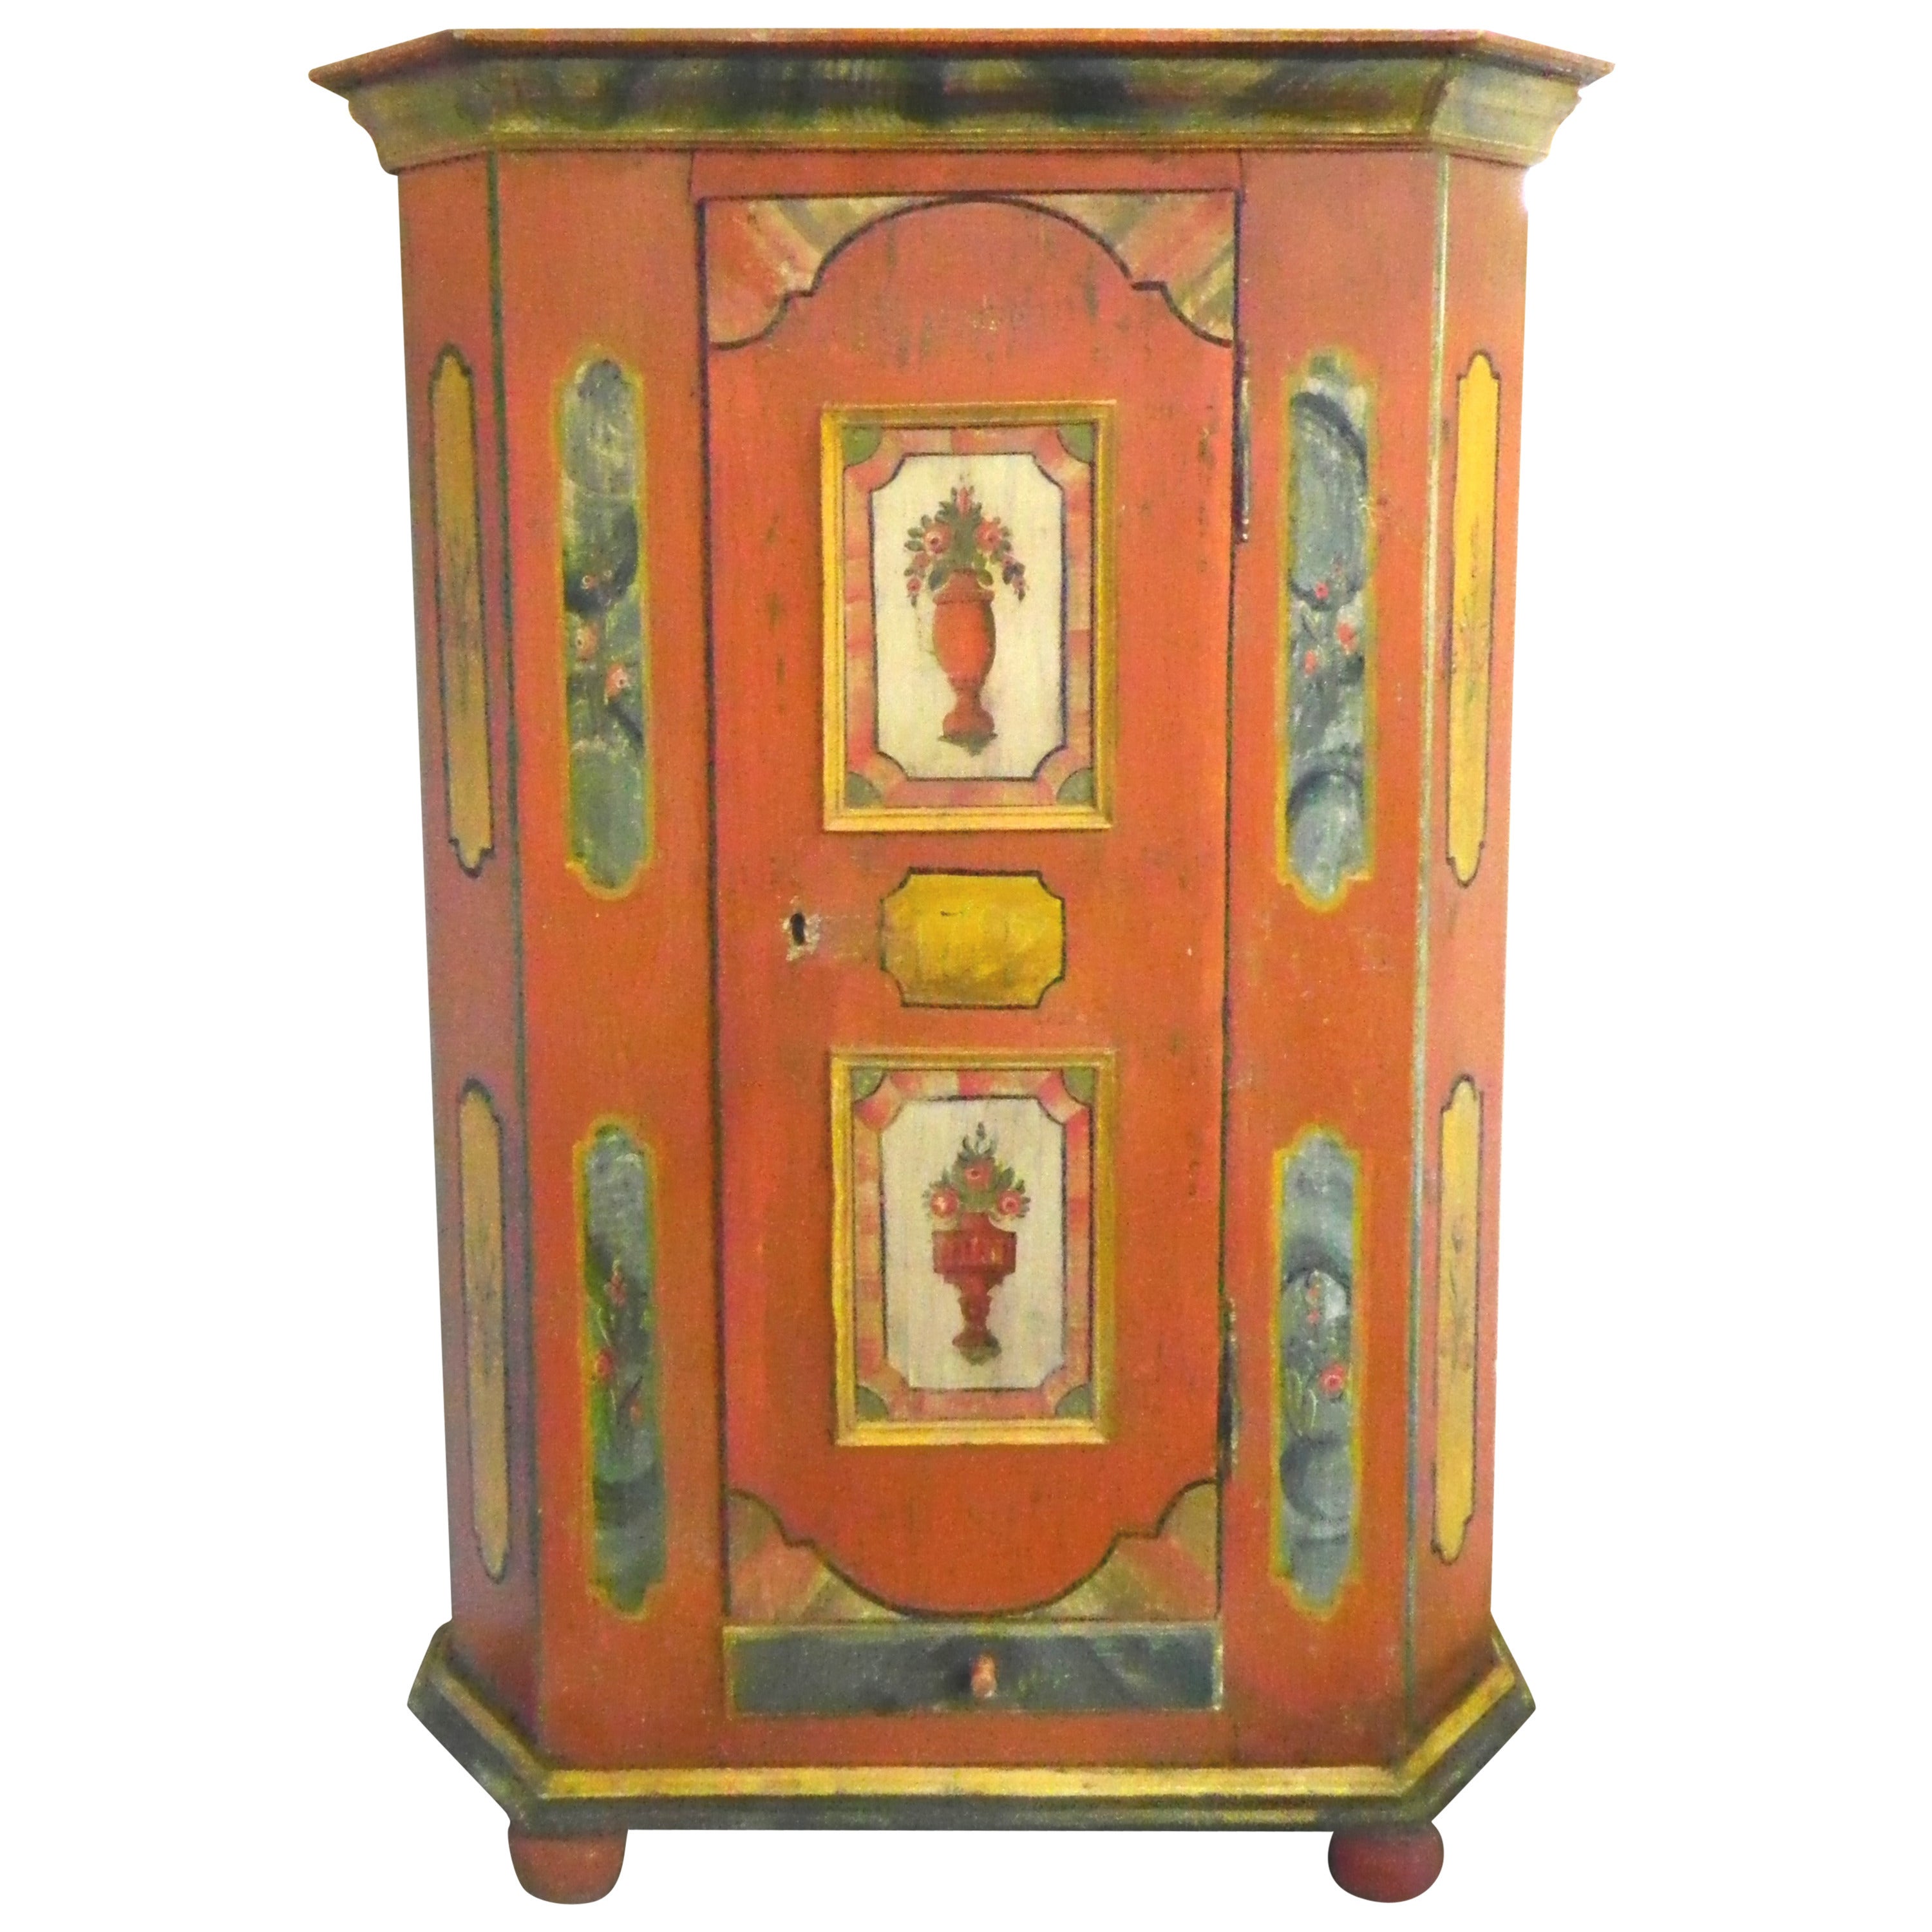 Peach Color Painted Wardrobe 18thc